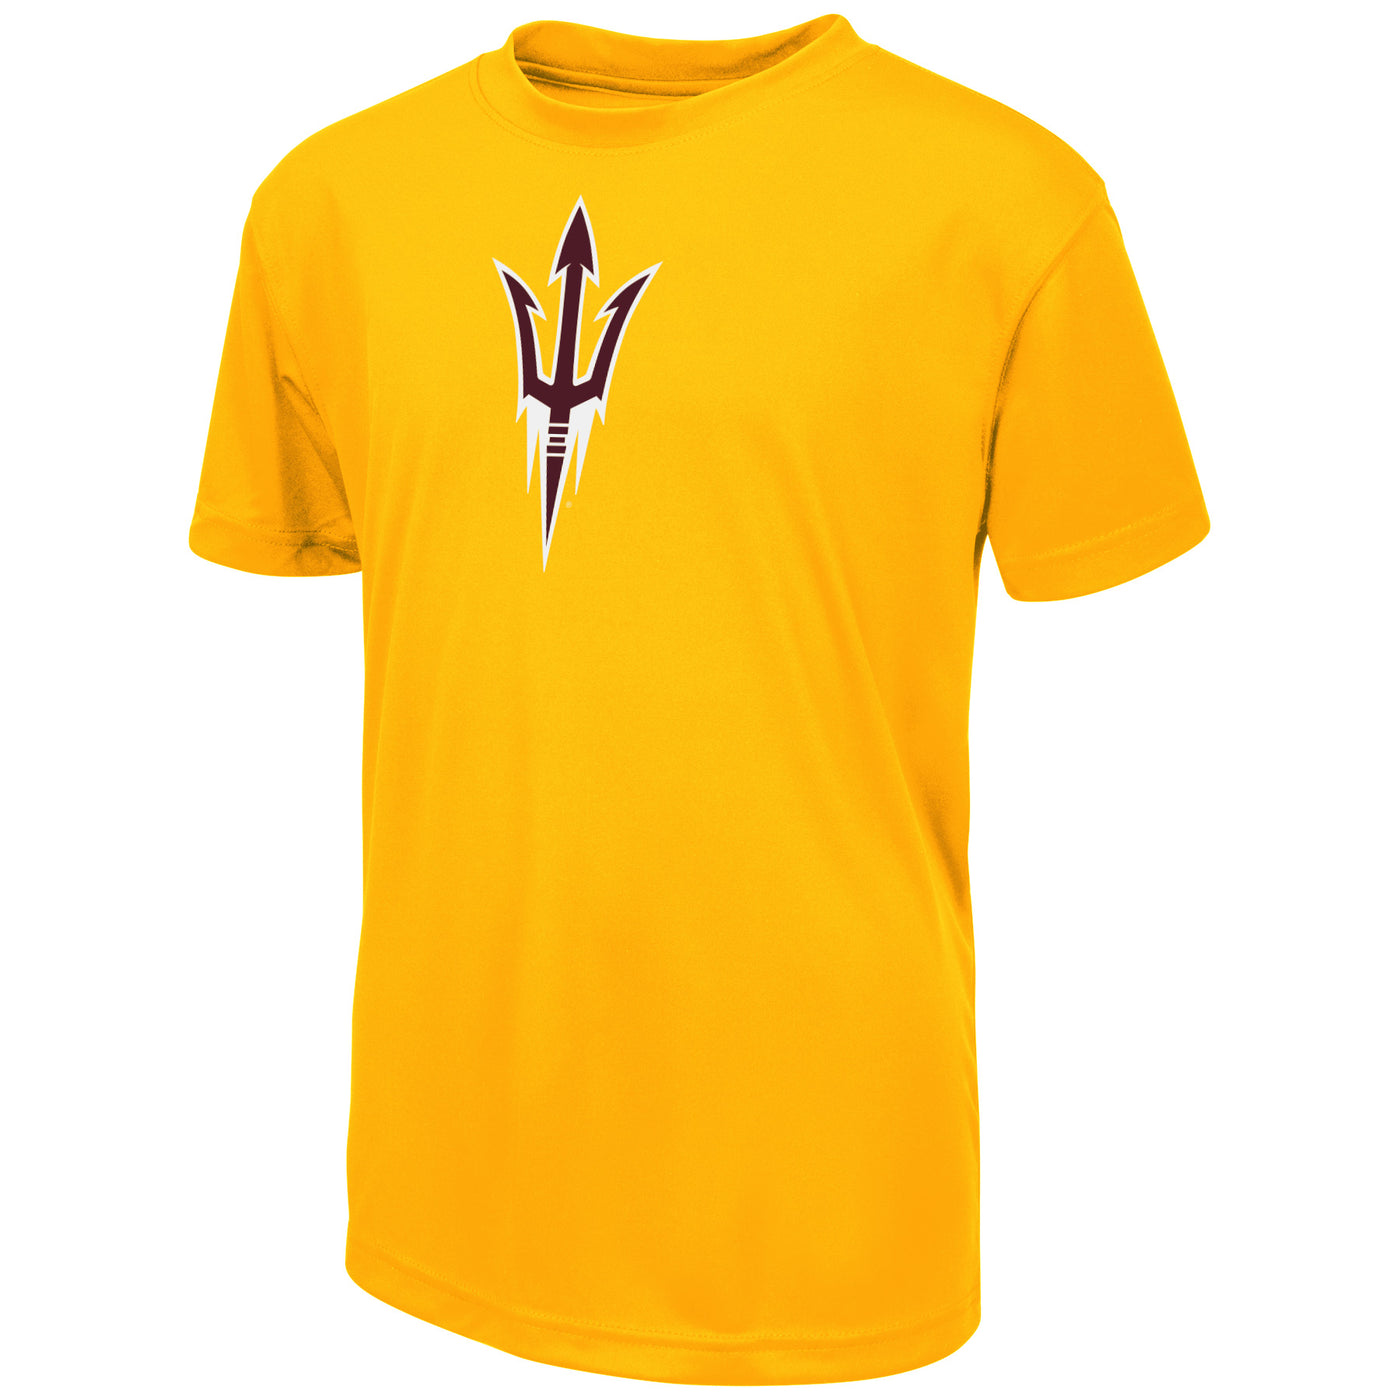 ASU youth gold athletic tee with white and maroon pitchfork